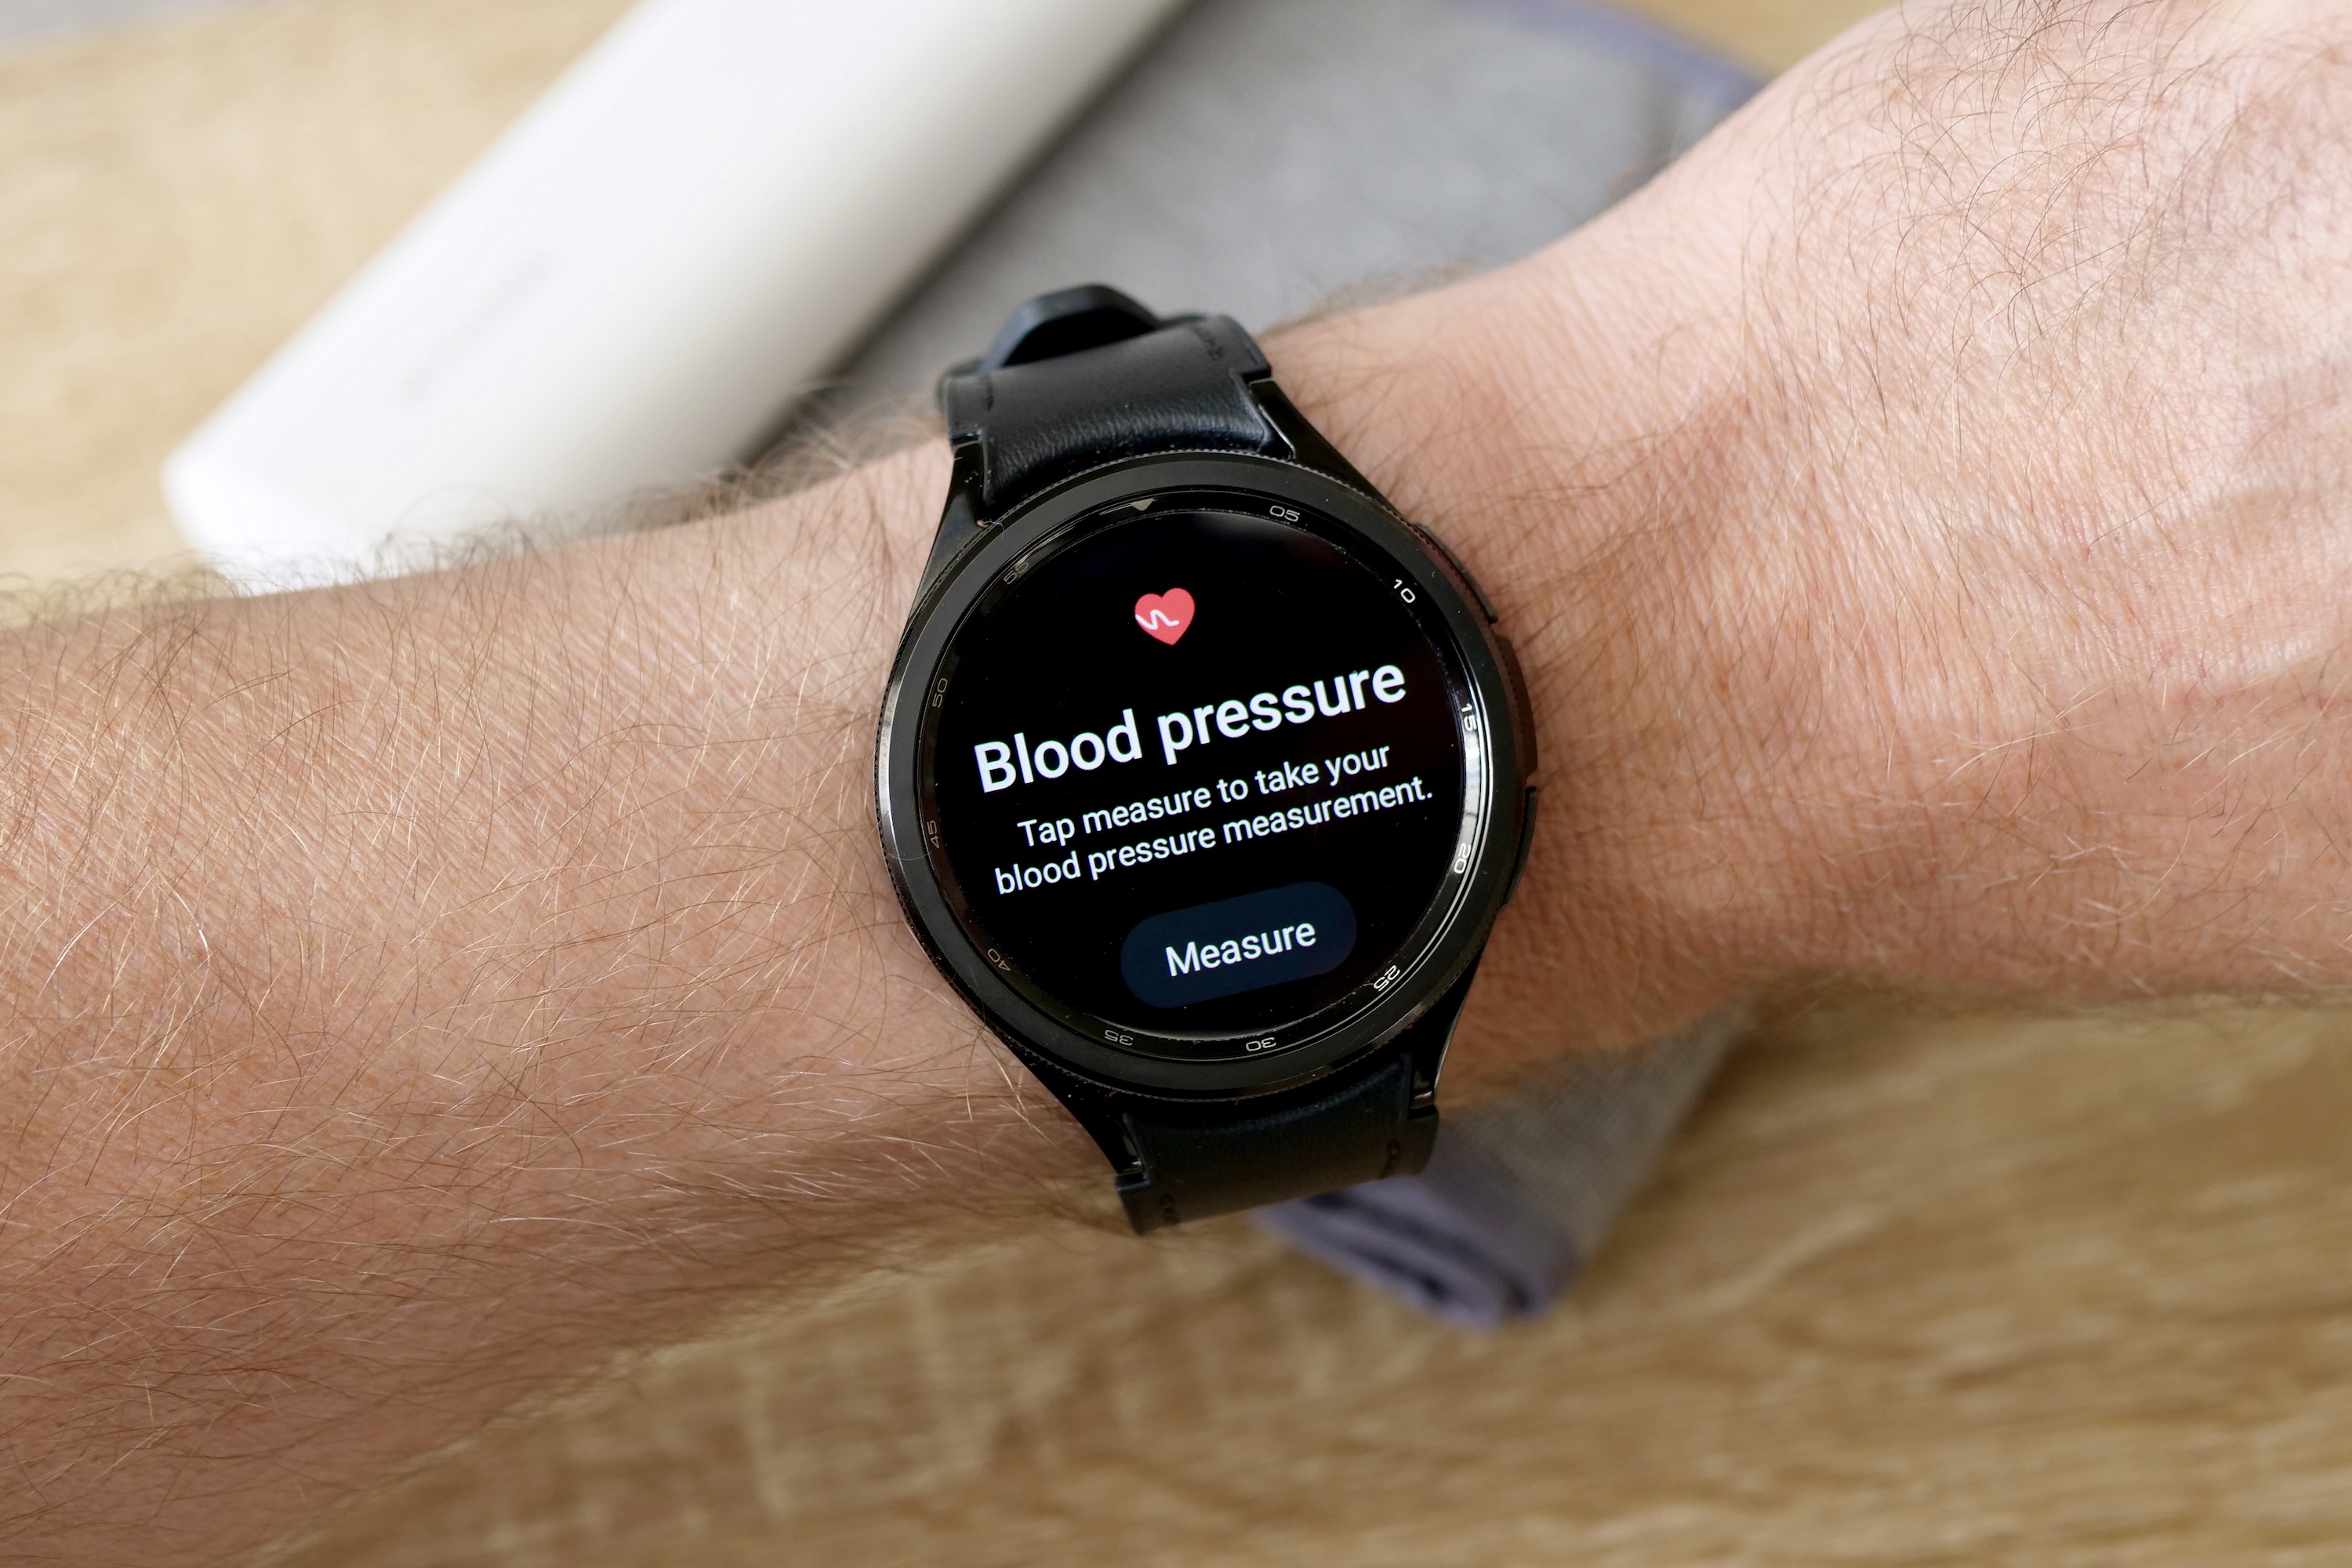 Next-gen Apple watch could feature blood pressure monitoring and sleep  apnea detection capabilities